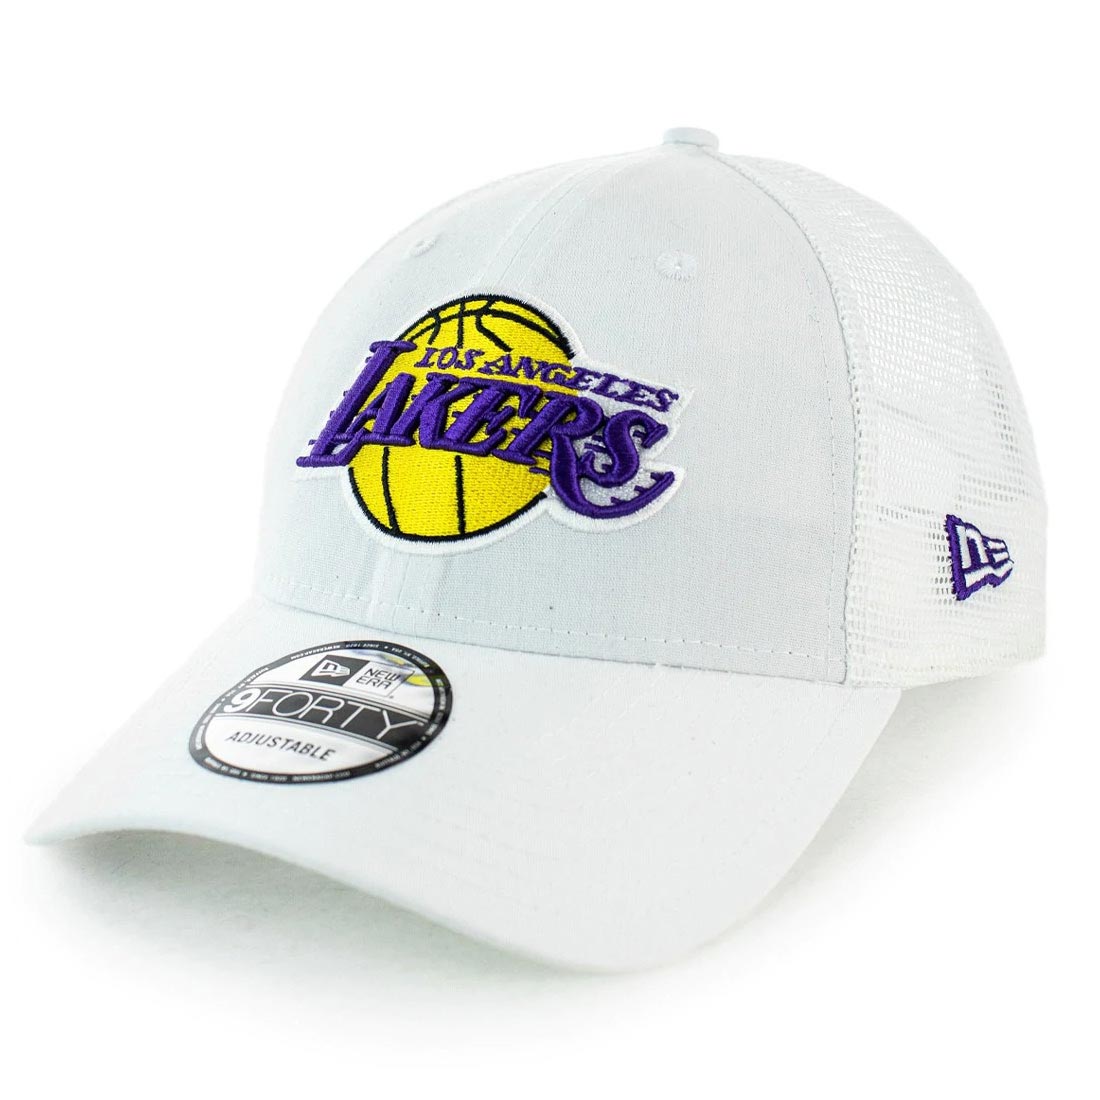 NEW ERA HOME FIELD 9FORTY LOS ANGELES LAKERS TRUCKER CAP